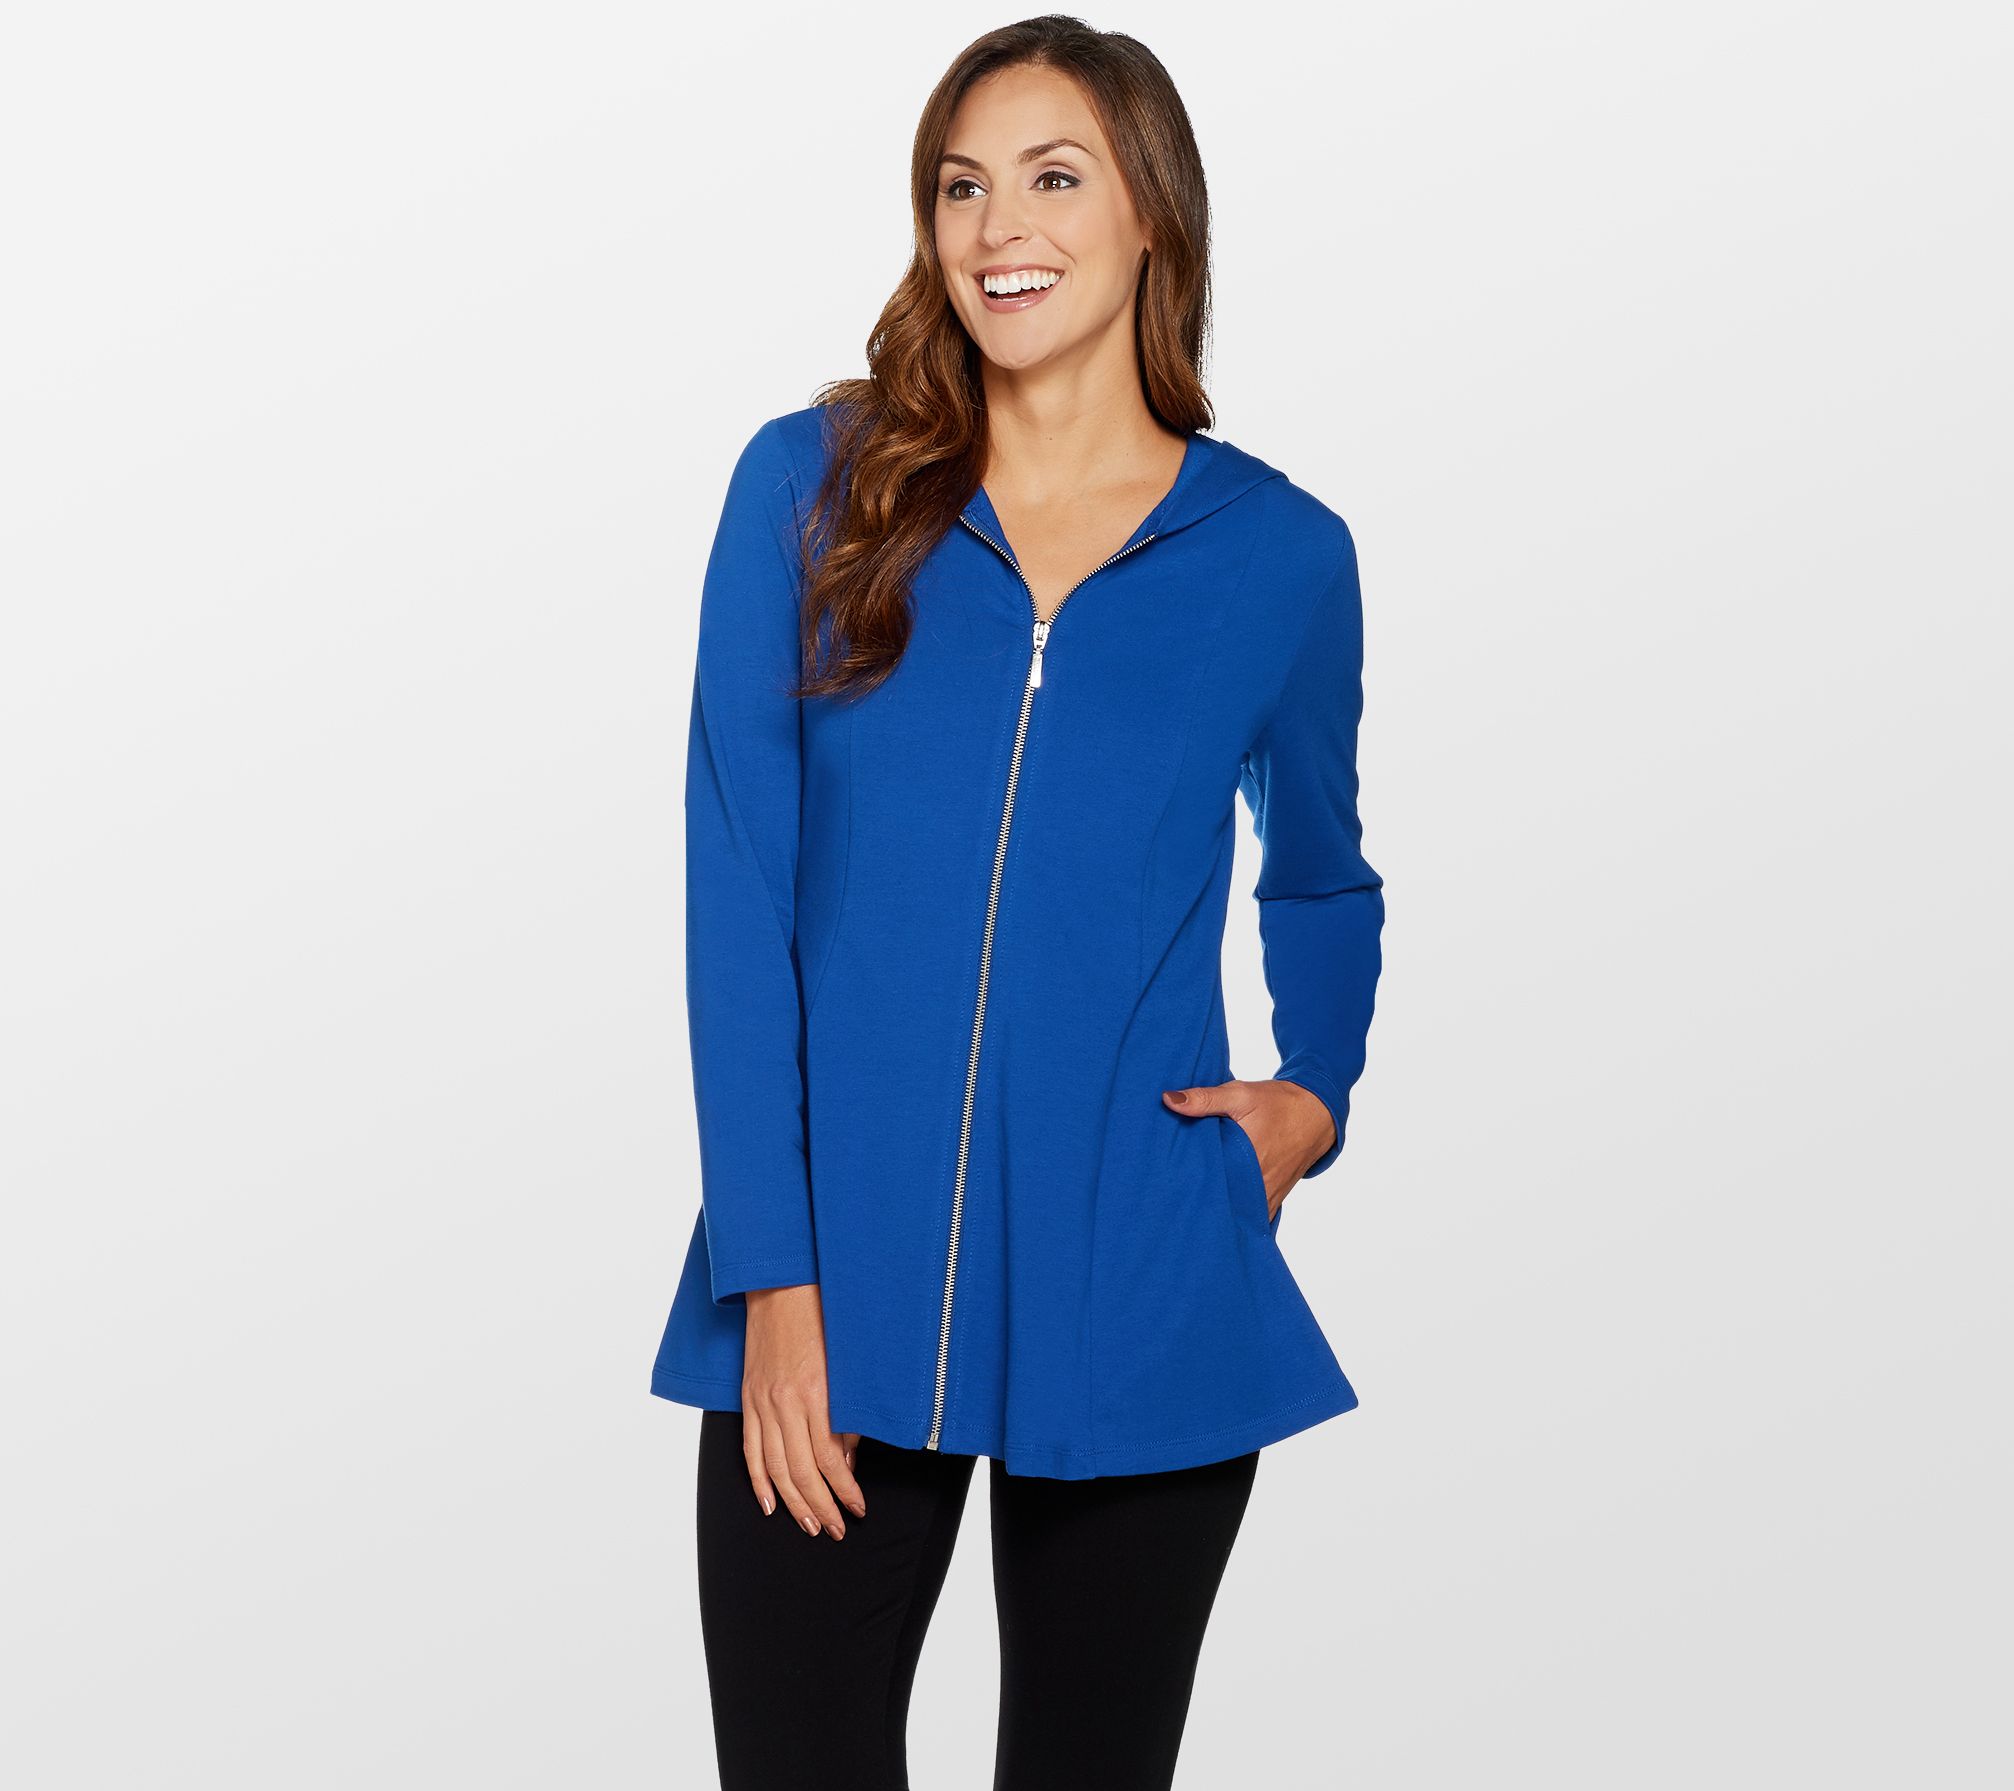 Denim & Co. Active Fit and Flare French Terry Zip Front Jacket - QVC.com